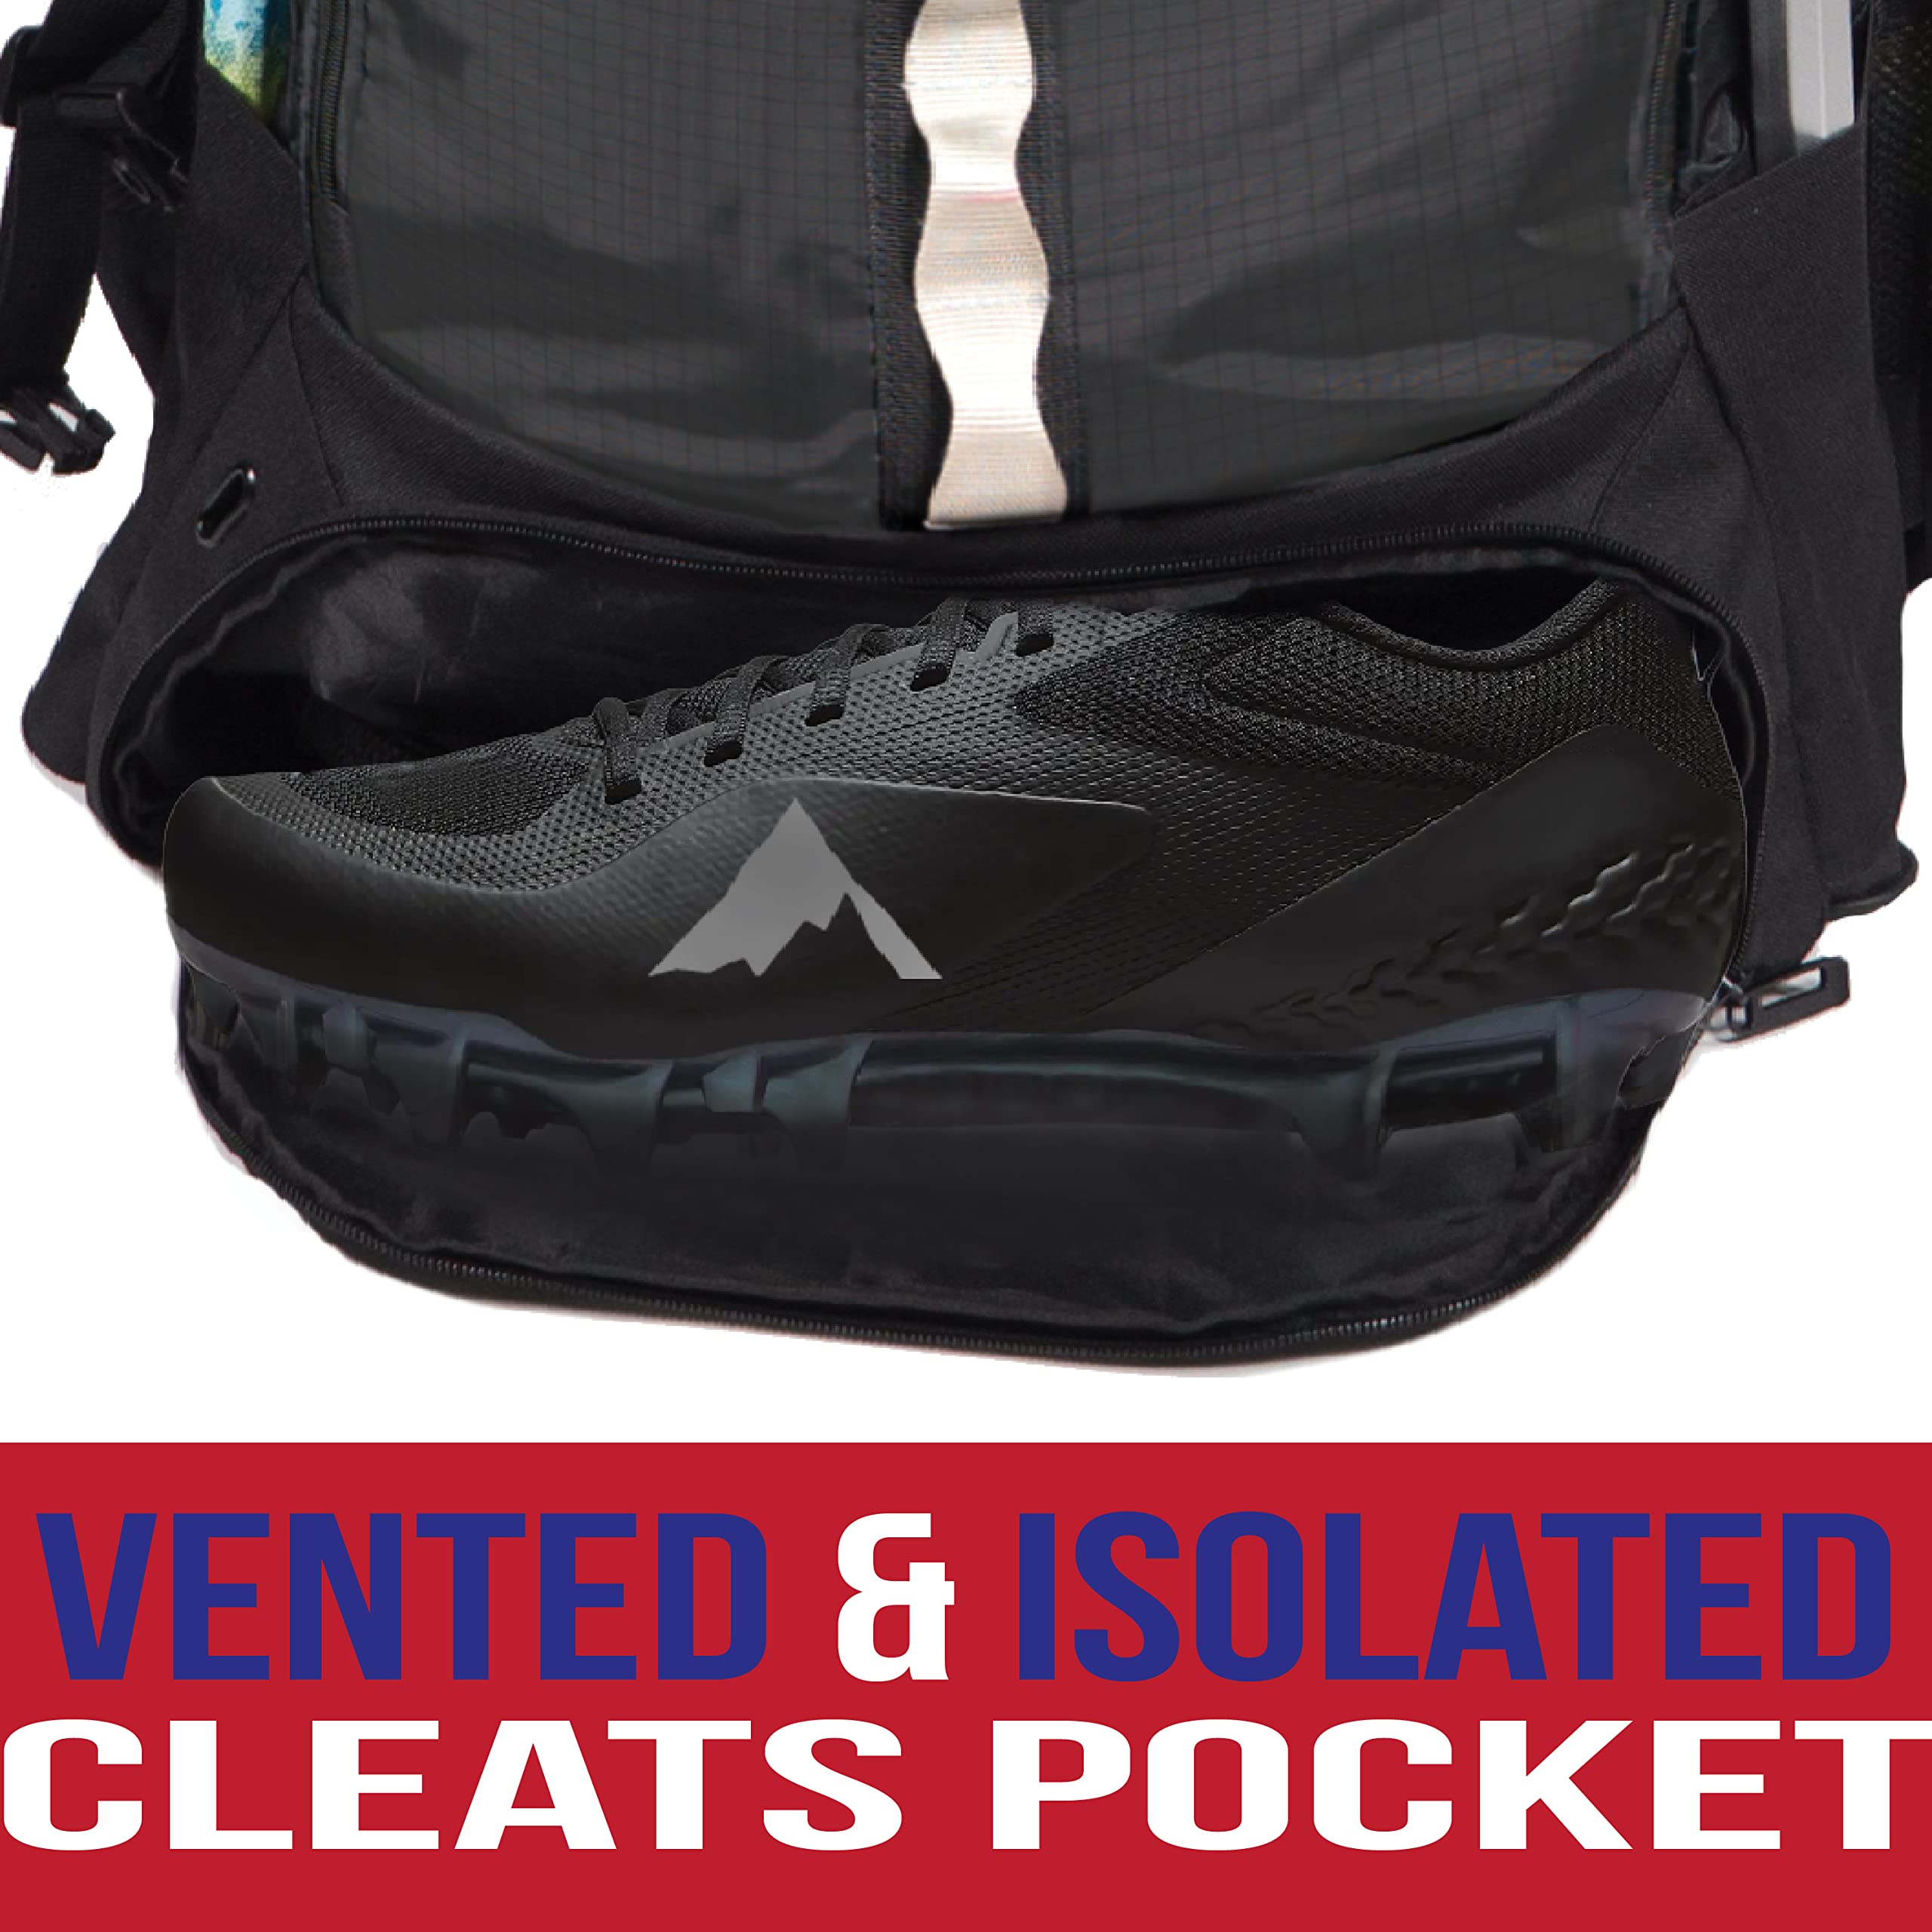 Athletico Lacrosse Bag - Extra Large Lacrosse Backpack - Holds All Lacrosse or Field Hockey Equipment - Two Stick Holders and Se